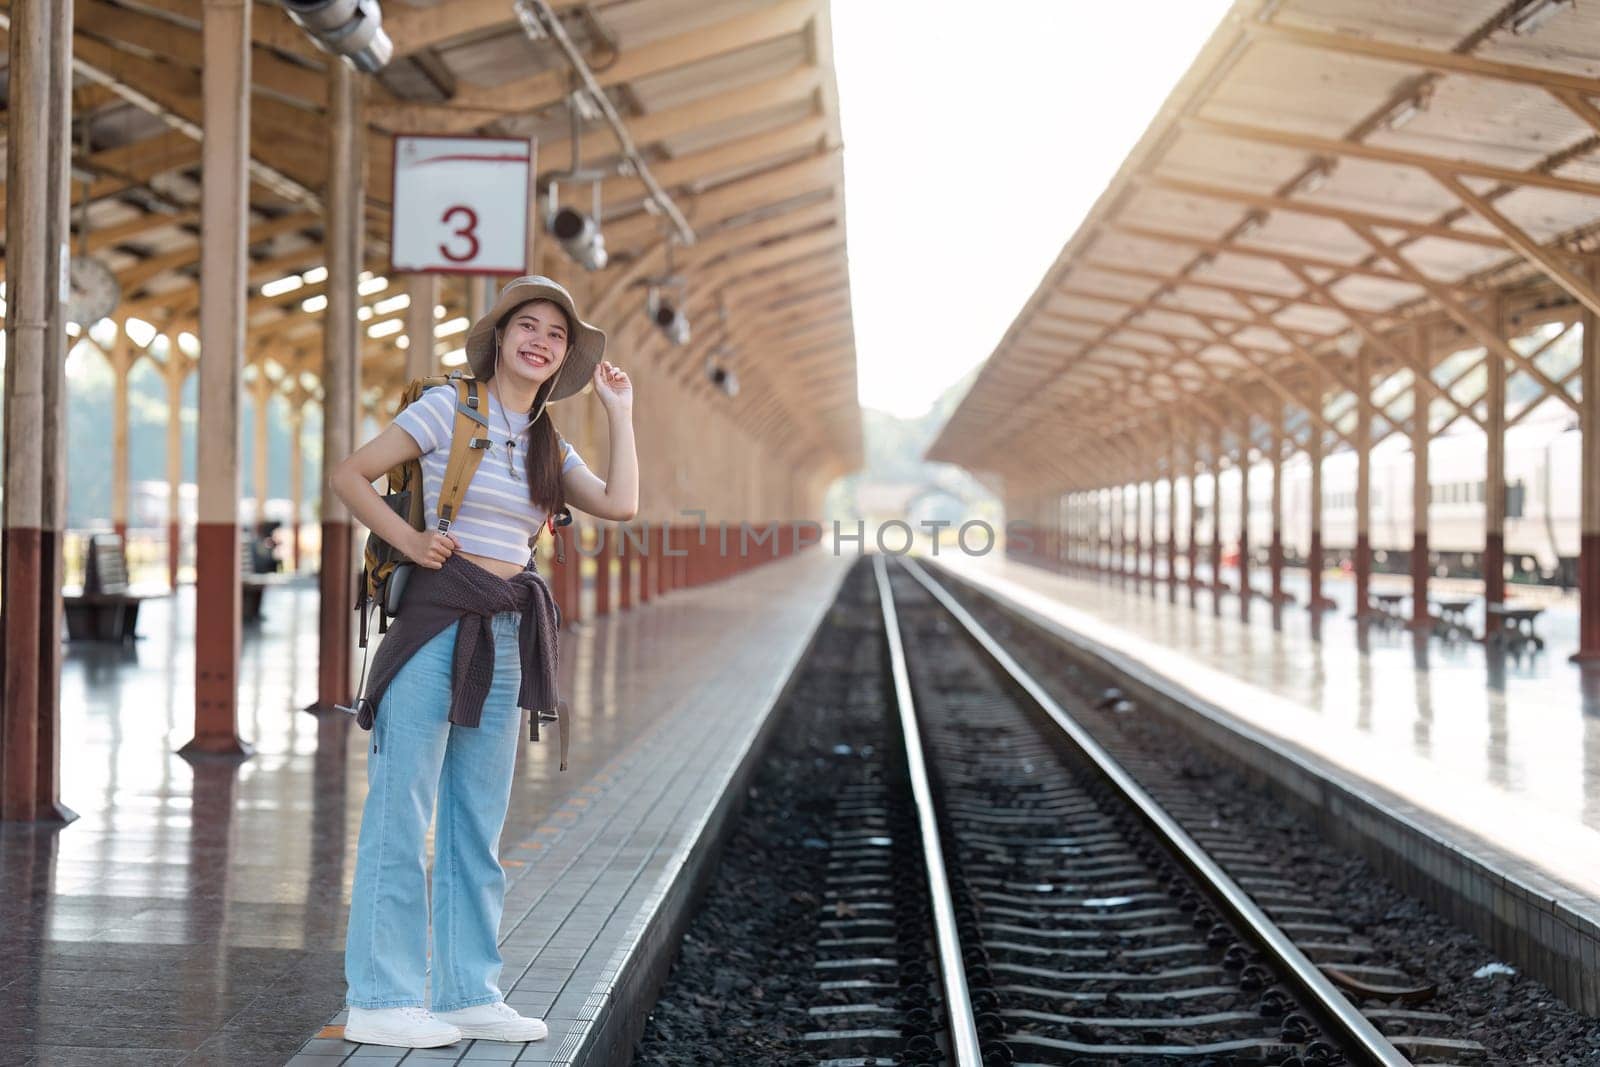 Young Female Traveler at Train Station Platform Ready for Adventure, Wearing Backpack and Hat, Smiling and Looking Excited for Journey, Sunlight Streaming Through Wooden Roof Structure by itchaznong